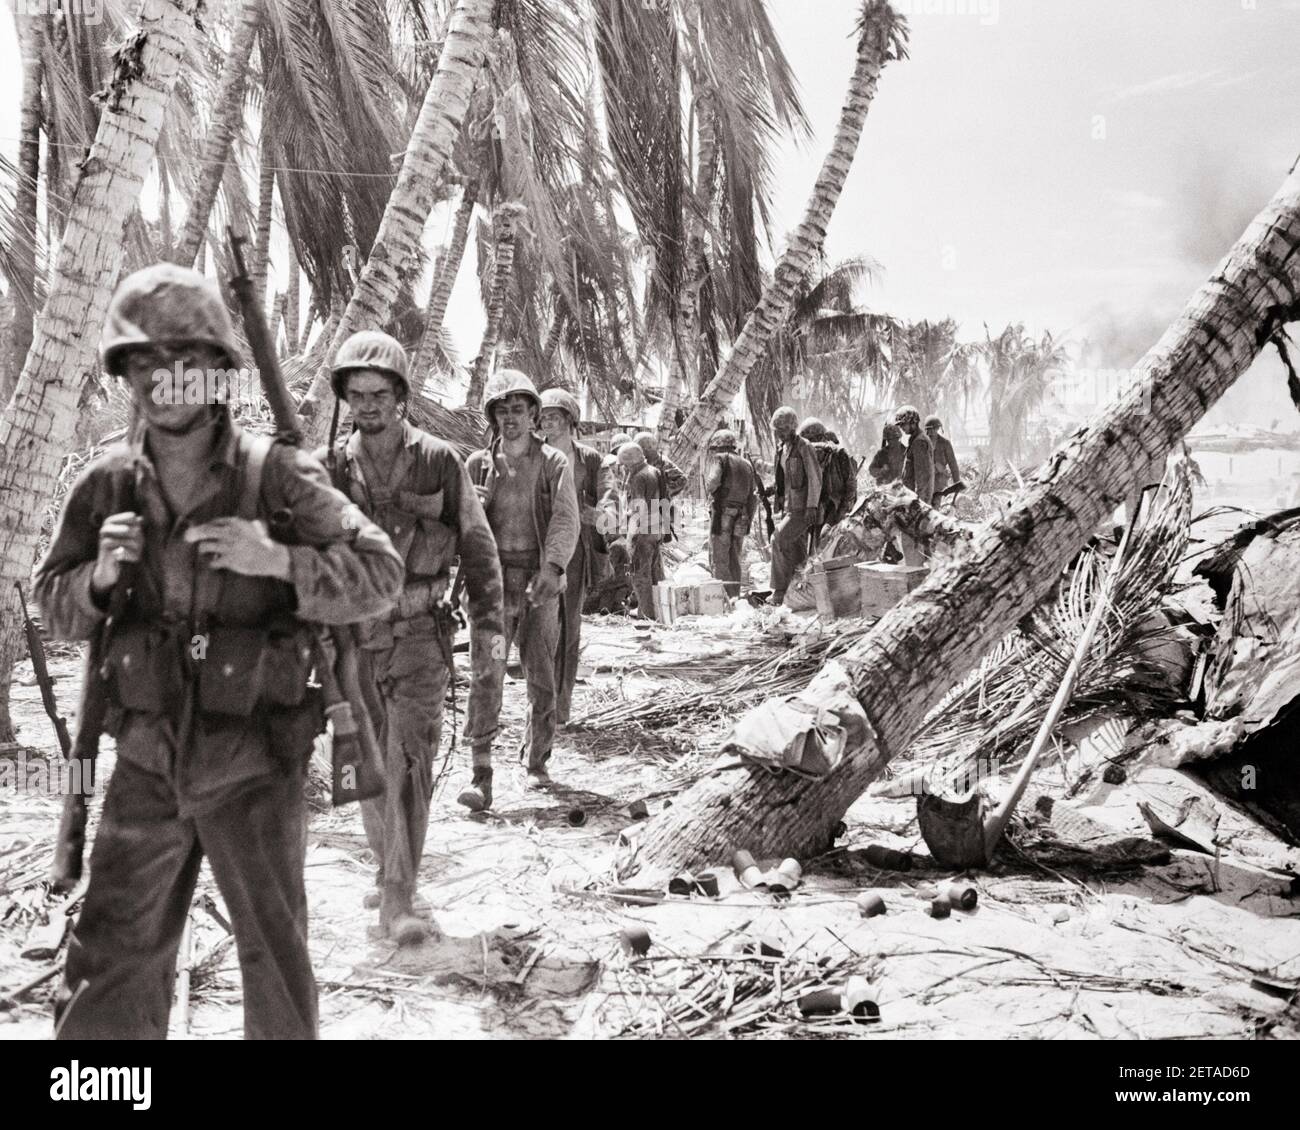 1940s COLUMN OF UNITED STATES MARINES BADLY IN NEED OF REST AND FOOD AFTER COMBAT ACTION IN THE SOUTH PACIFIC WORLD WAR II - m628 HAR001 HARS COPY SPACE FULL-LENGTH PERSONS INSPIRATION MALES RISK CONFIDENCE AFTER B&W SUCCESS WIDE ANGLE STRENGTH THIS VICTORY STRATEGY COURAGE AND CAMOUFLAGE COLUMN LEADERSHIP POWERFUL PROGRESS WORLD WARS PRIDE WORLD WAR WORLD WAR TWO WORLD WAR II IN OF ON THE MARINES OCCUPATIONS UNIFORMS CONCEPTUAL WORLD WAR 2 VICIOUS COMBAT COOPERATION FIREARM FIREARMS HAVE INFANTRY MID-ADULT MID-ADULT MAN NEED REST SITUATION YOUNG ADULT MAN BLACK AND WHITE CAUCASIAN ETHNICITY Stock Photo